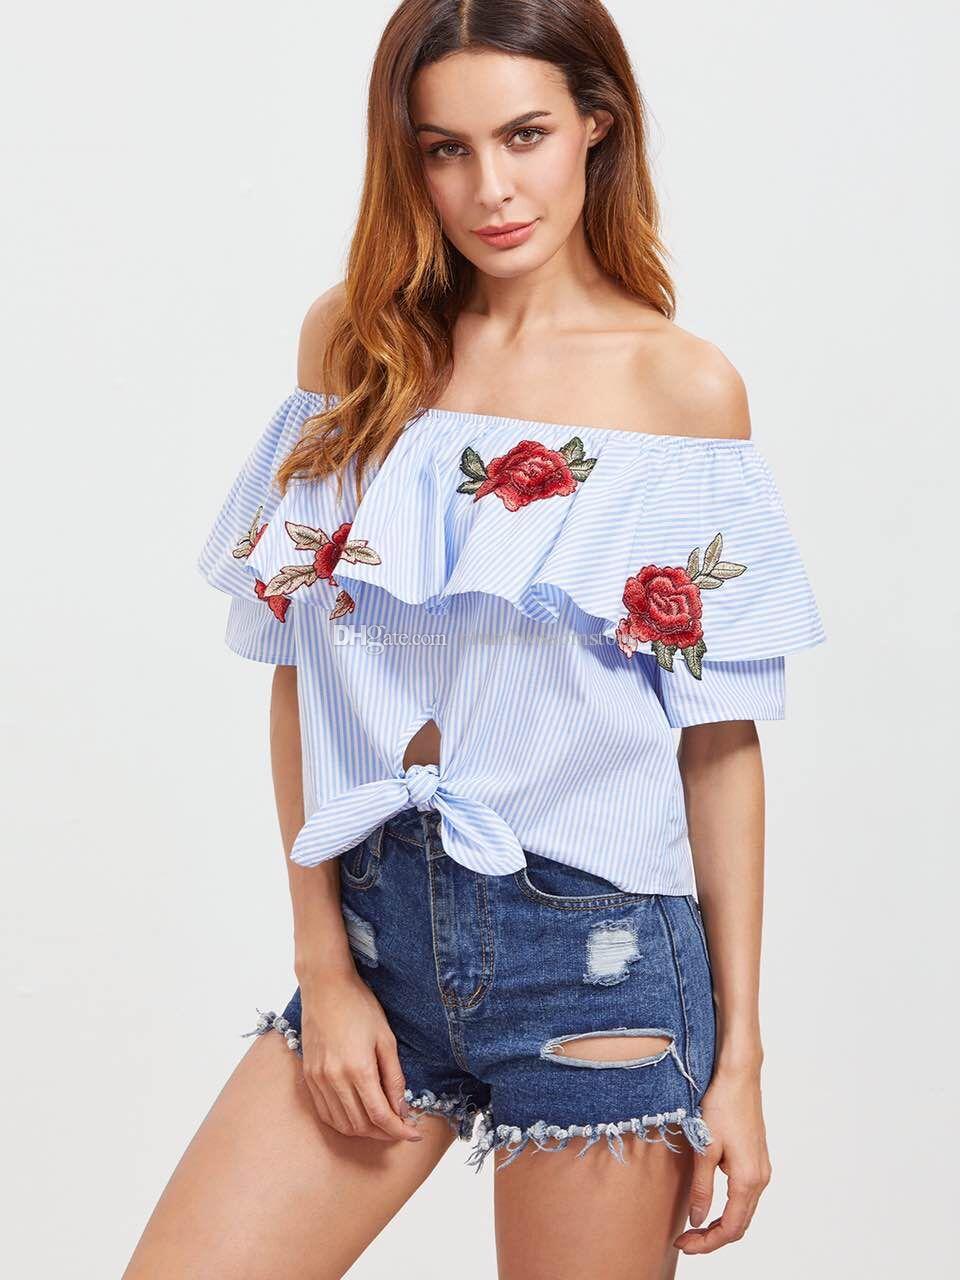 Blouses for busty women